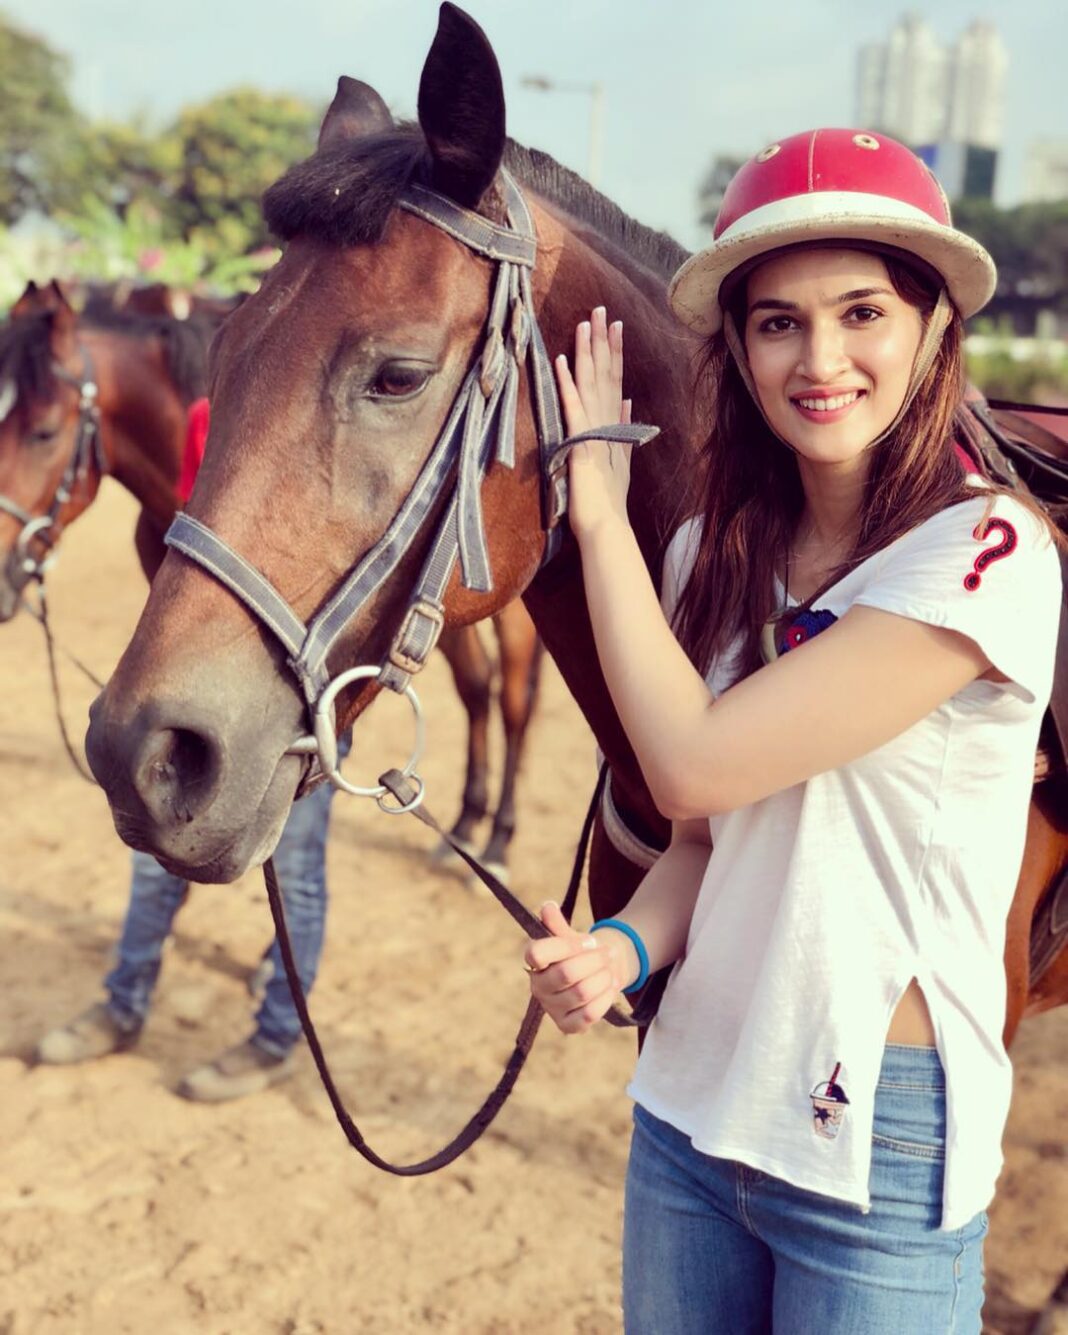 Kriti Sanon Instagram - So good to be back with this beauty! 🏇🏇 Horse riding sessions start again with Suresh Sir & @amateurridersclub .. this time for #Panipat